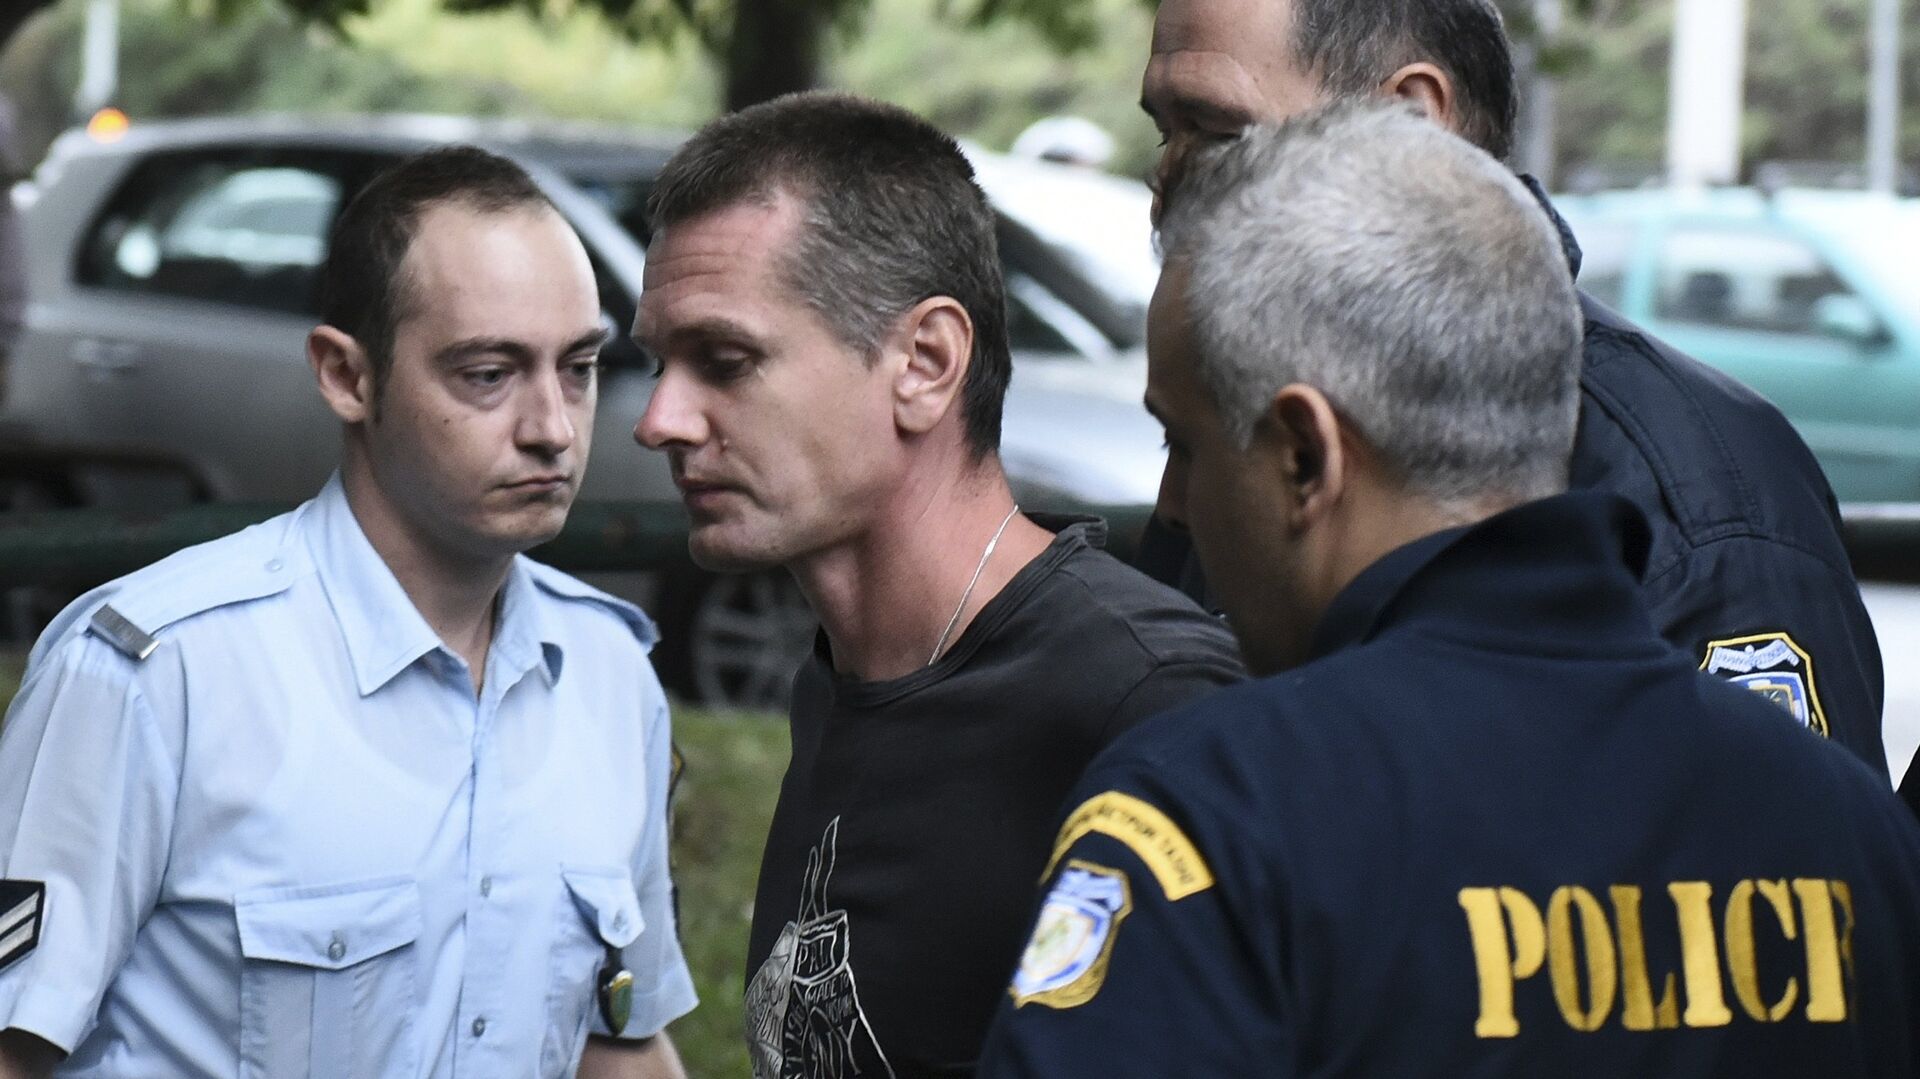 A Russian man identified as Alexander Vinnik, center, is escorted by police officers to the courthouse at the northern Greek city of Thessaloniki on Friday, Sept. 29, 2017 - Sputnik International, 1920, 09.07.2021